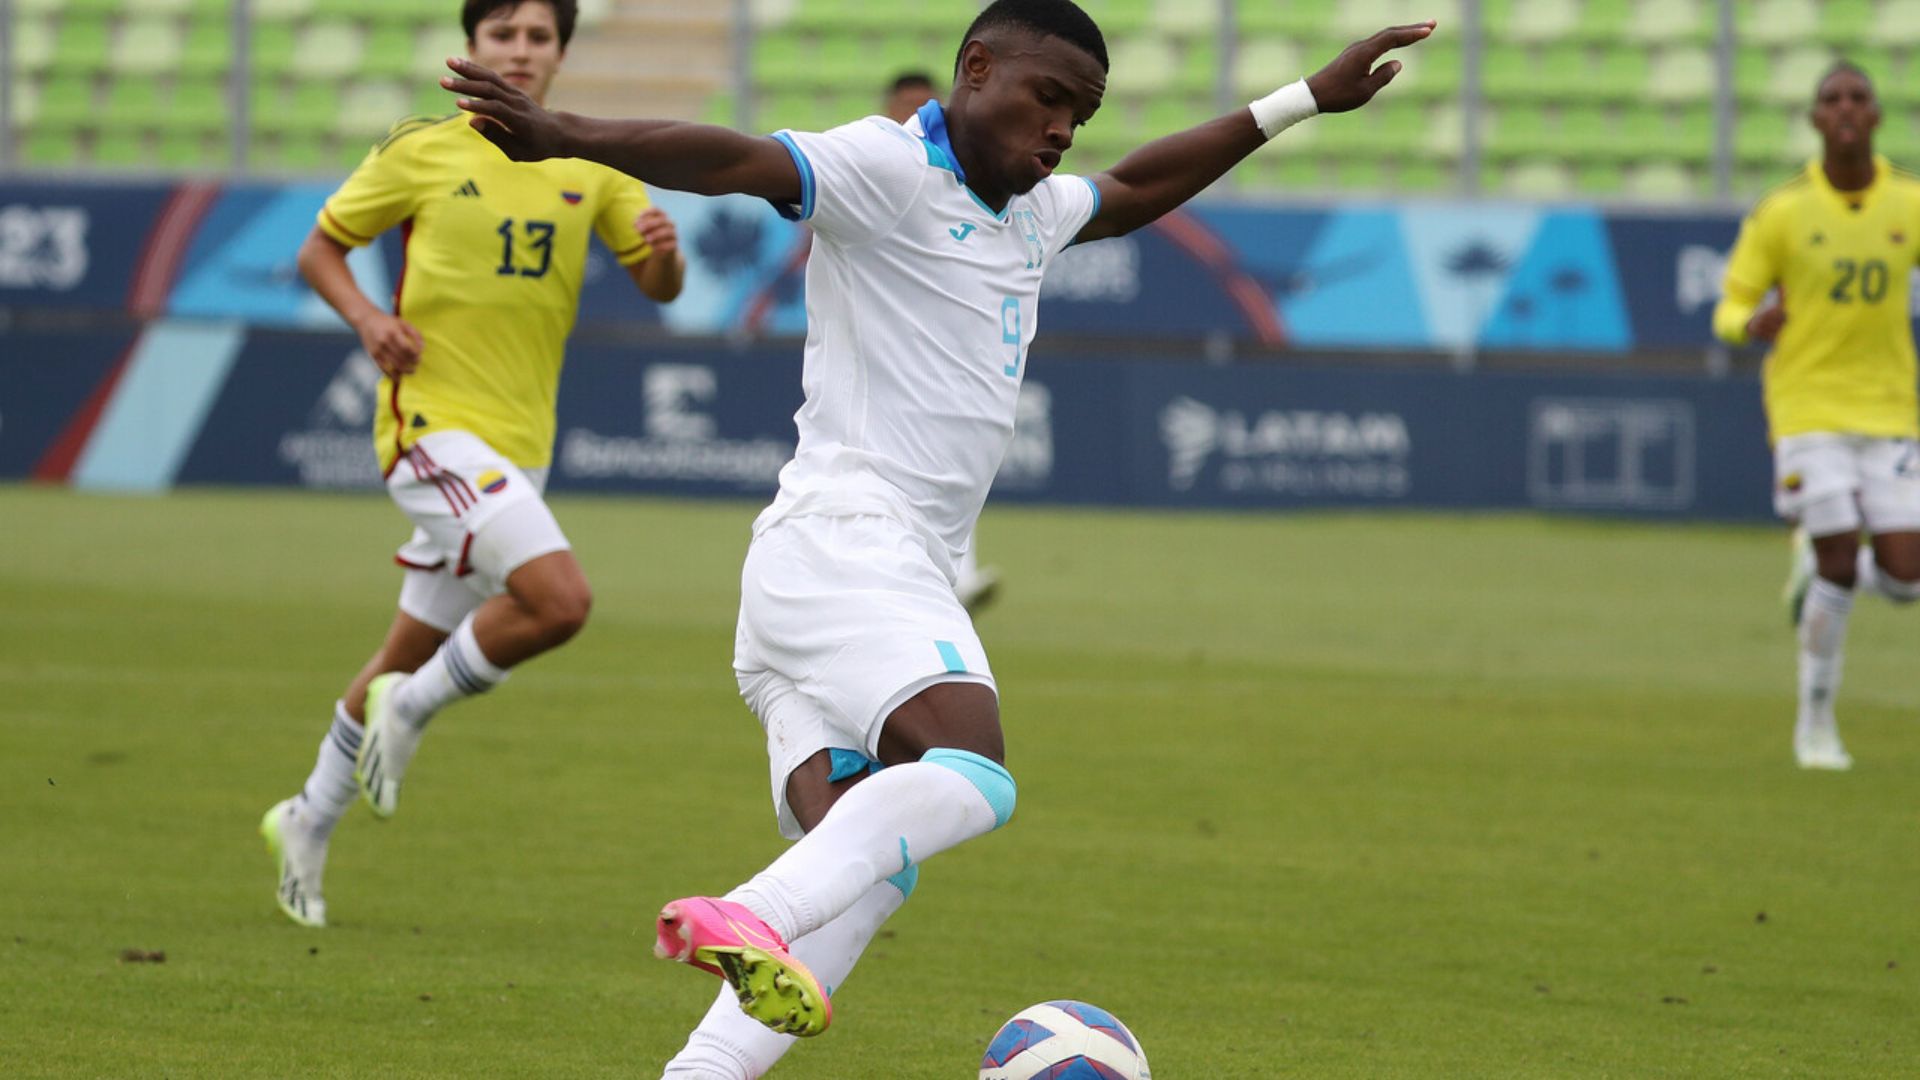 Colombia defeats Honduras 2-0 in Male's Football opening match